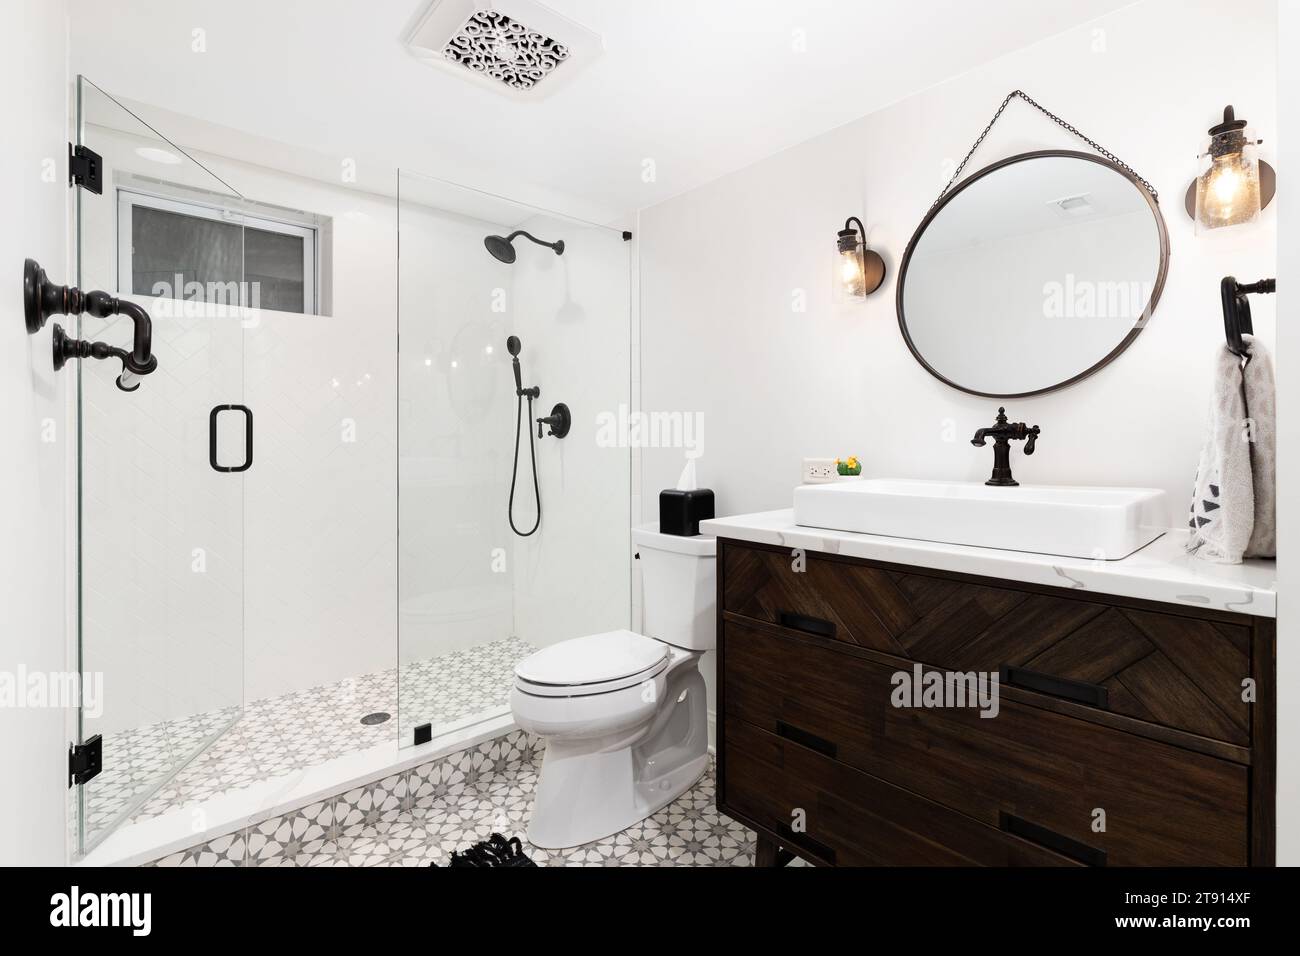 A cozy bathroom with a dark wood cabinet and vessel sink, an mosaic pattern tile flooring, and herringbone shower tile walls. Stock Photo